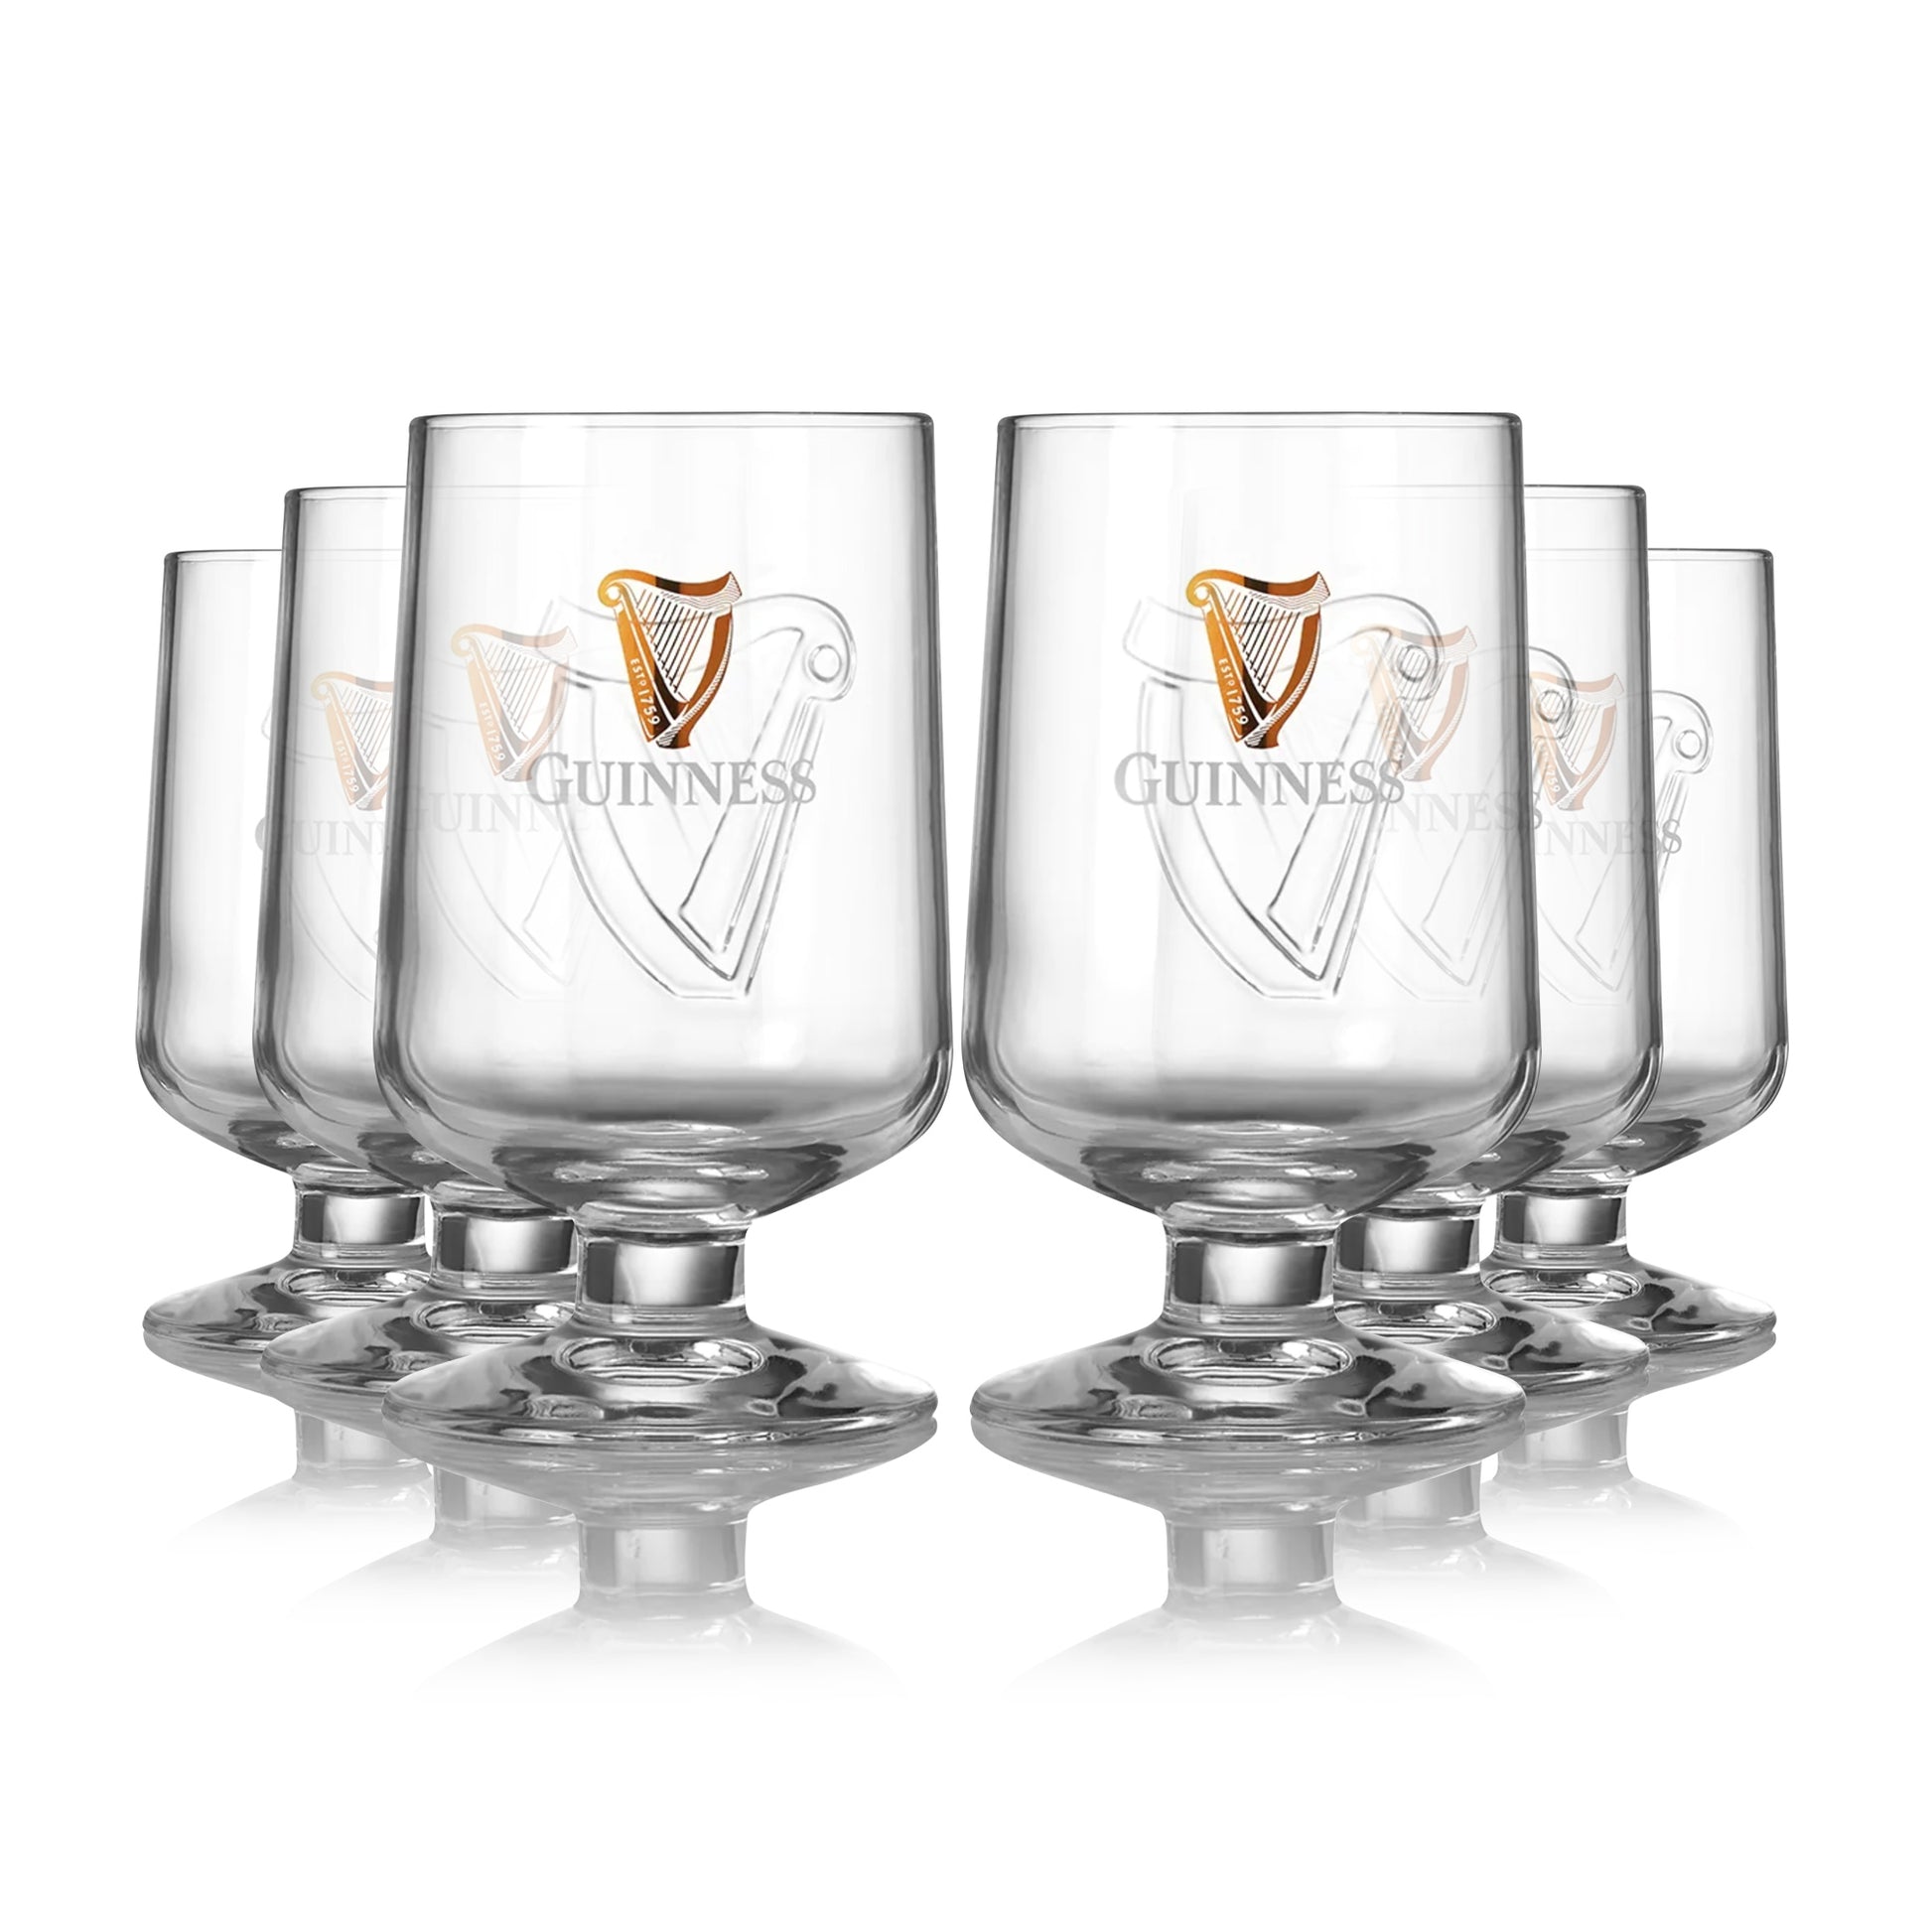 Six Guinness Embossed Stem Glass 6 Pack glasses on a white background.